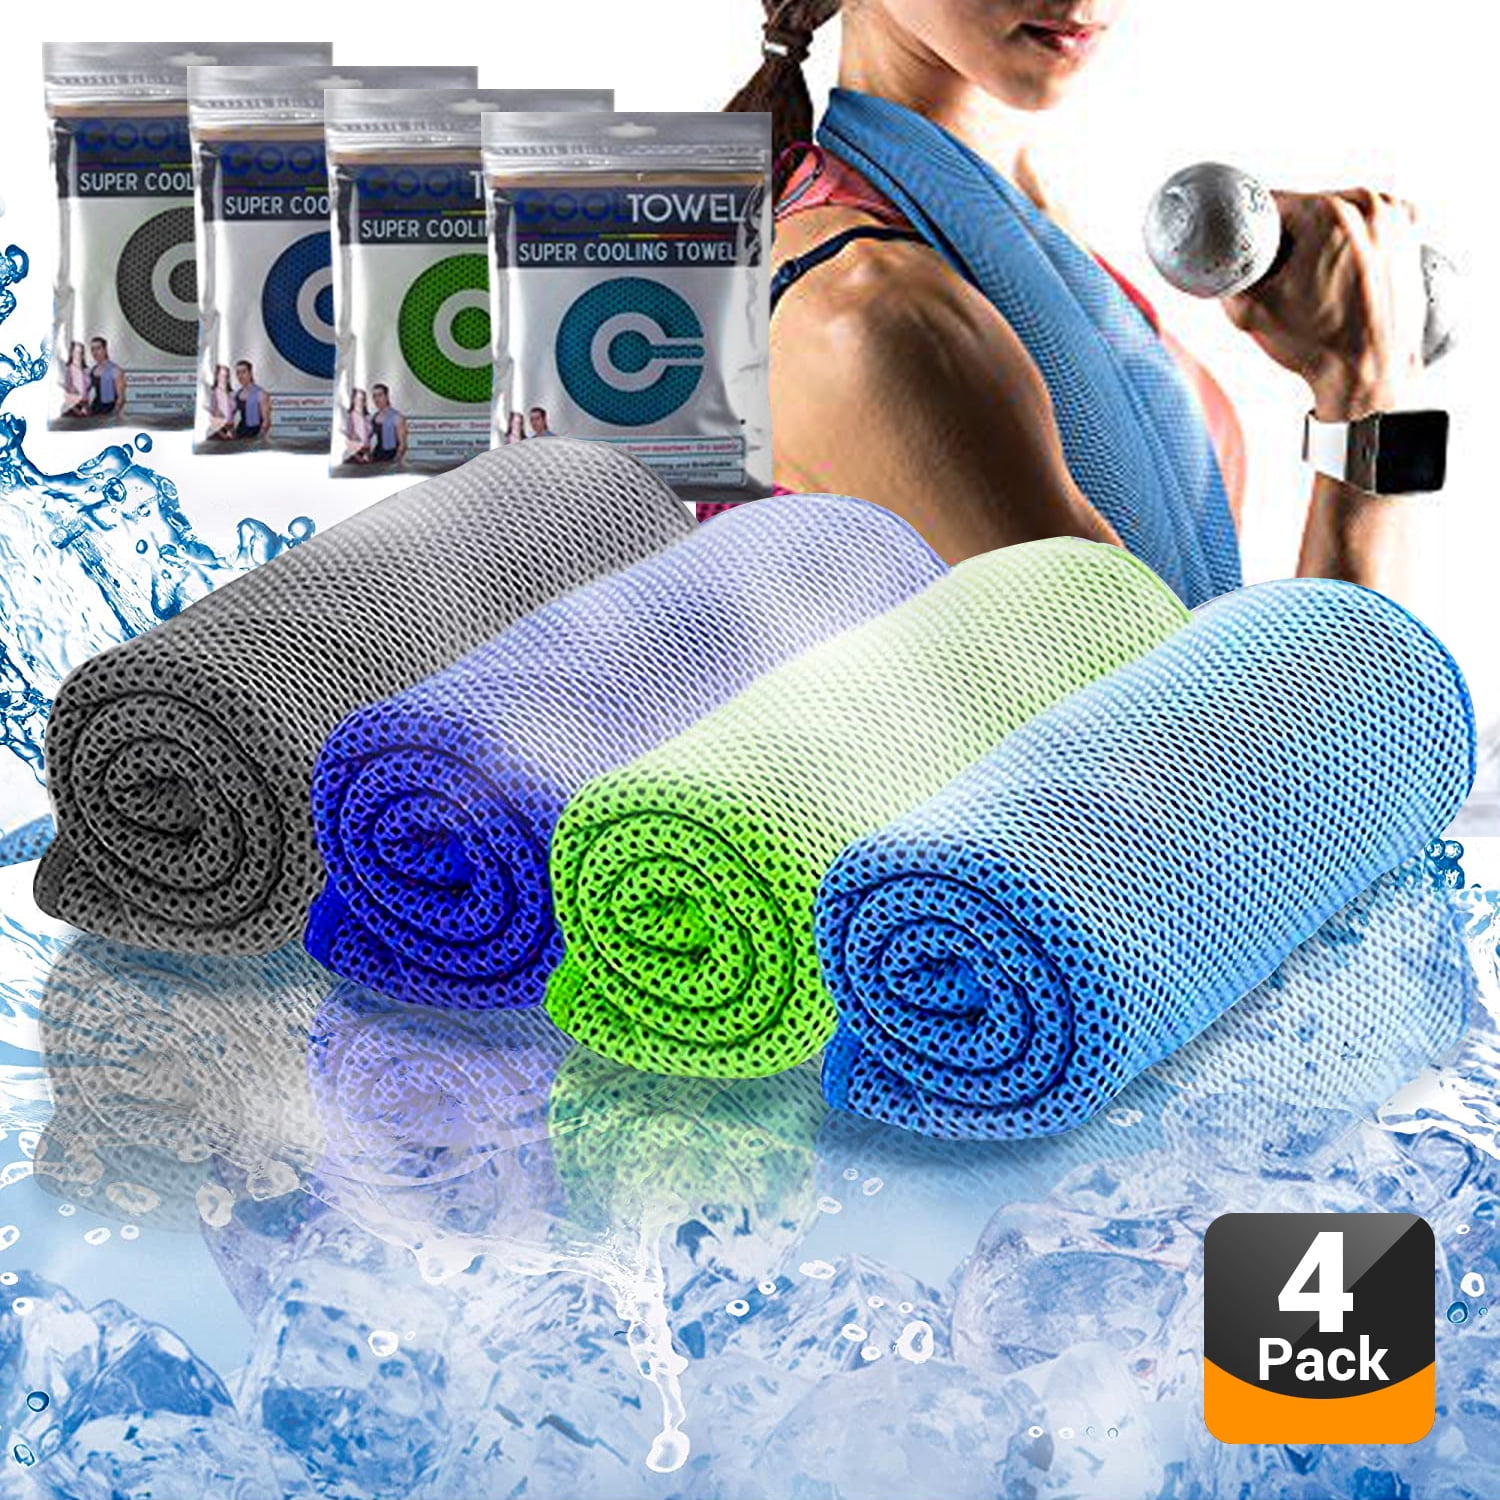 Fitness Soft Breathable Chilly Towel for Sports 40x 12 Running & More Yoga Travel Gym Pilates Camping Instant Relief Cooling Ice Towels Workout 5Pack Cooling Towels 